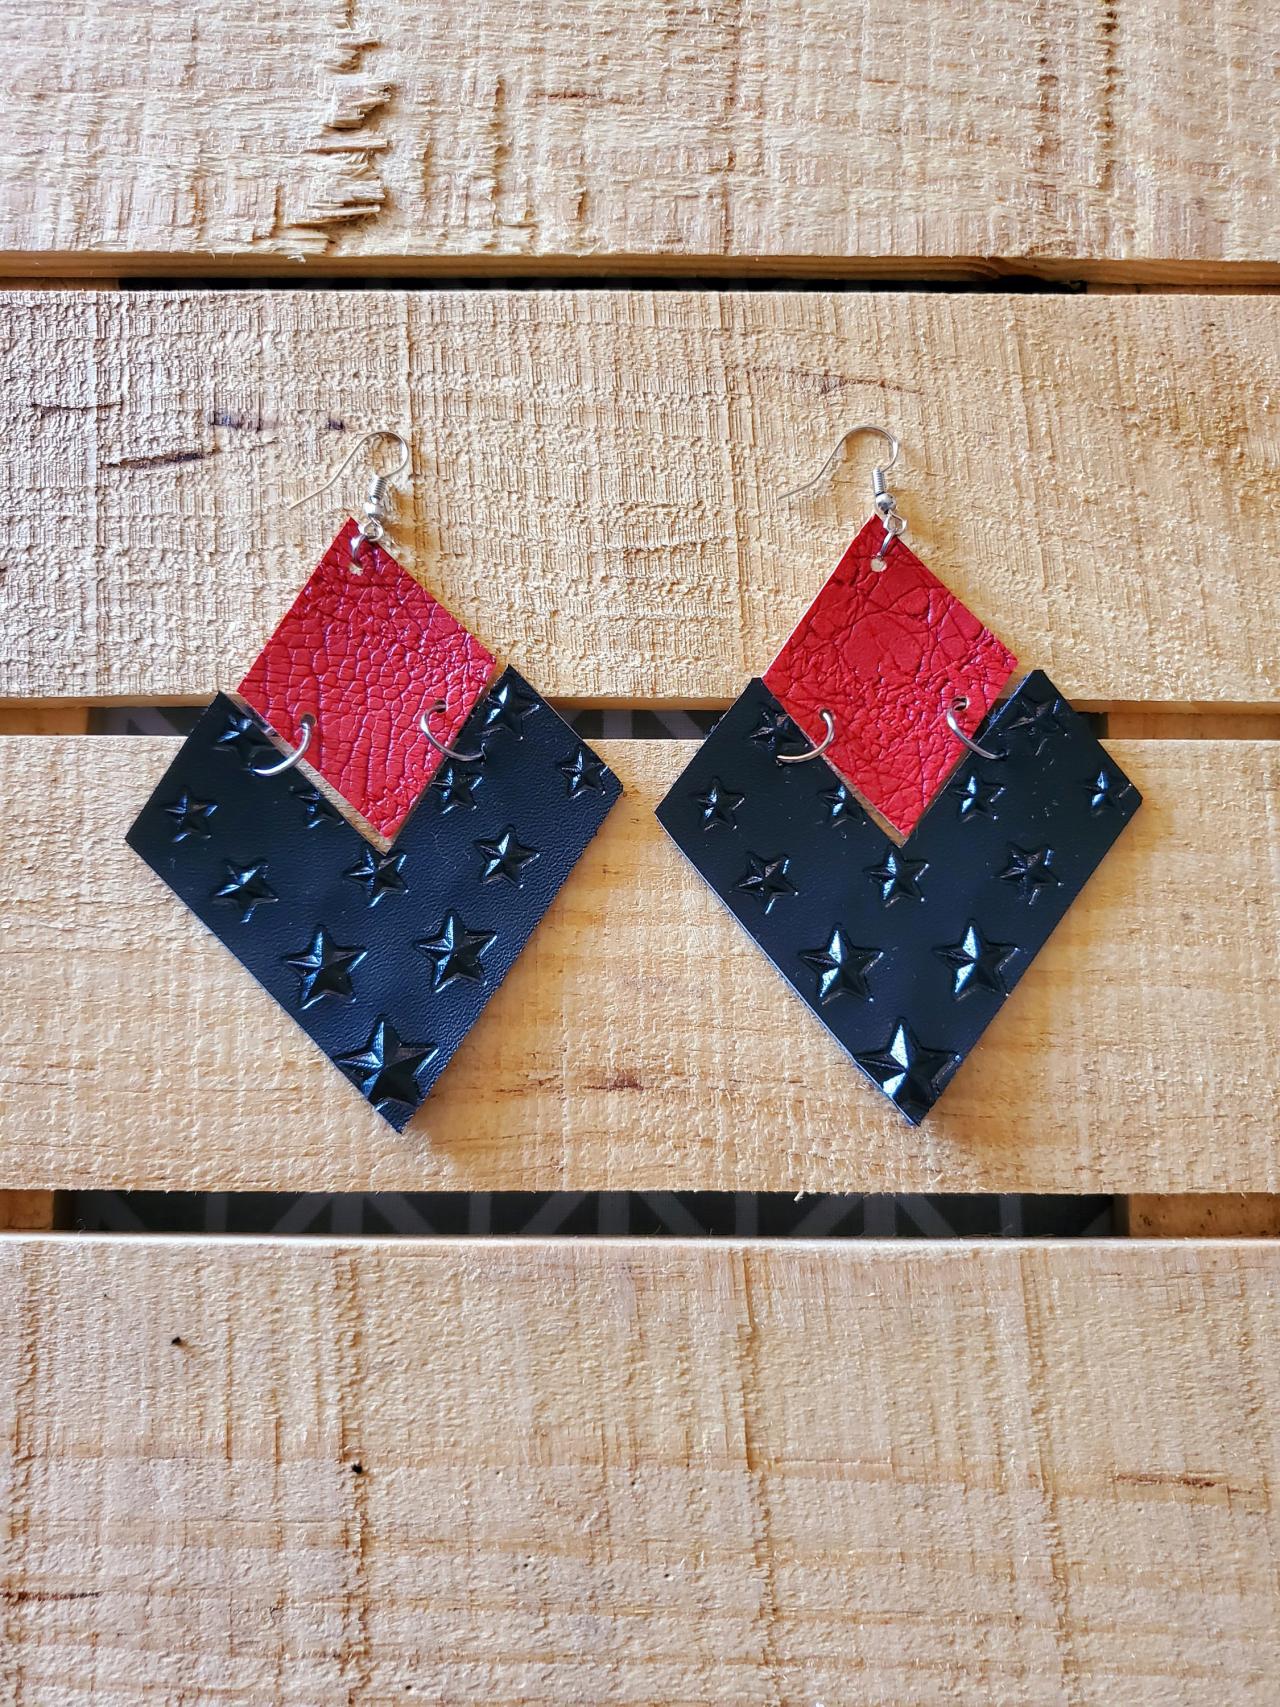 Fall Leather Earrings, Red And Black Jewelry, Distressed Leather Earrings, Metallic Earrings, Holiday Jewelry, Womans Gift, Rustic Boho Chic